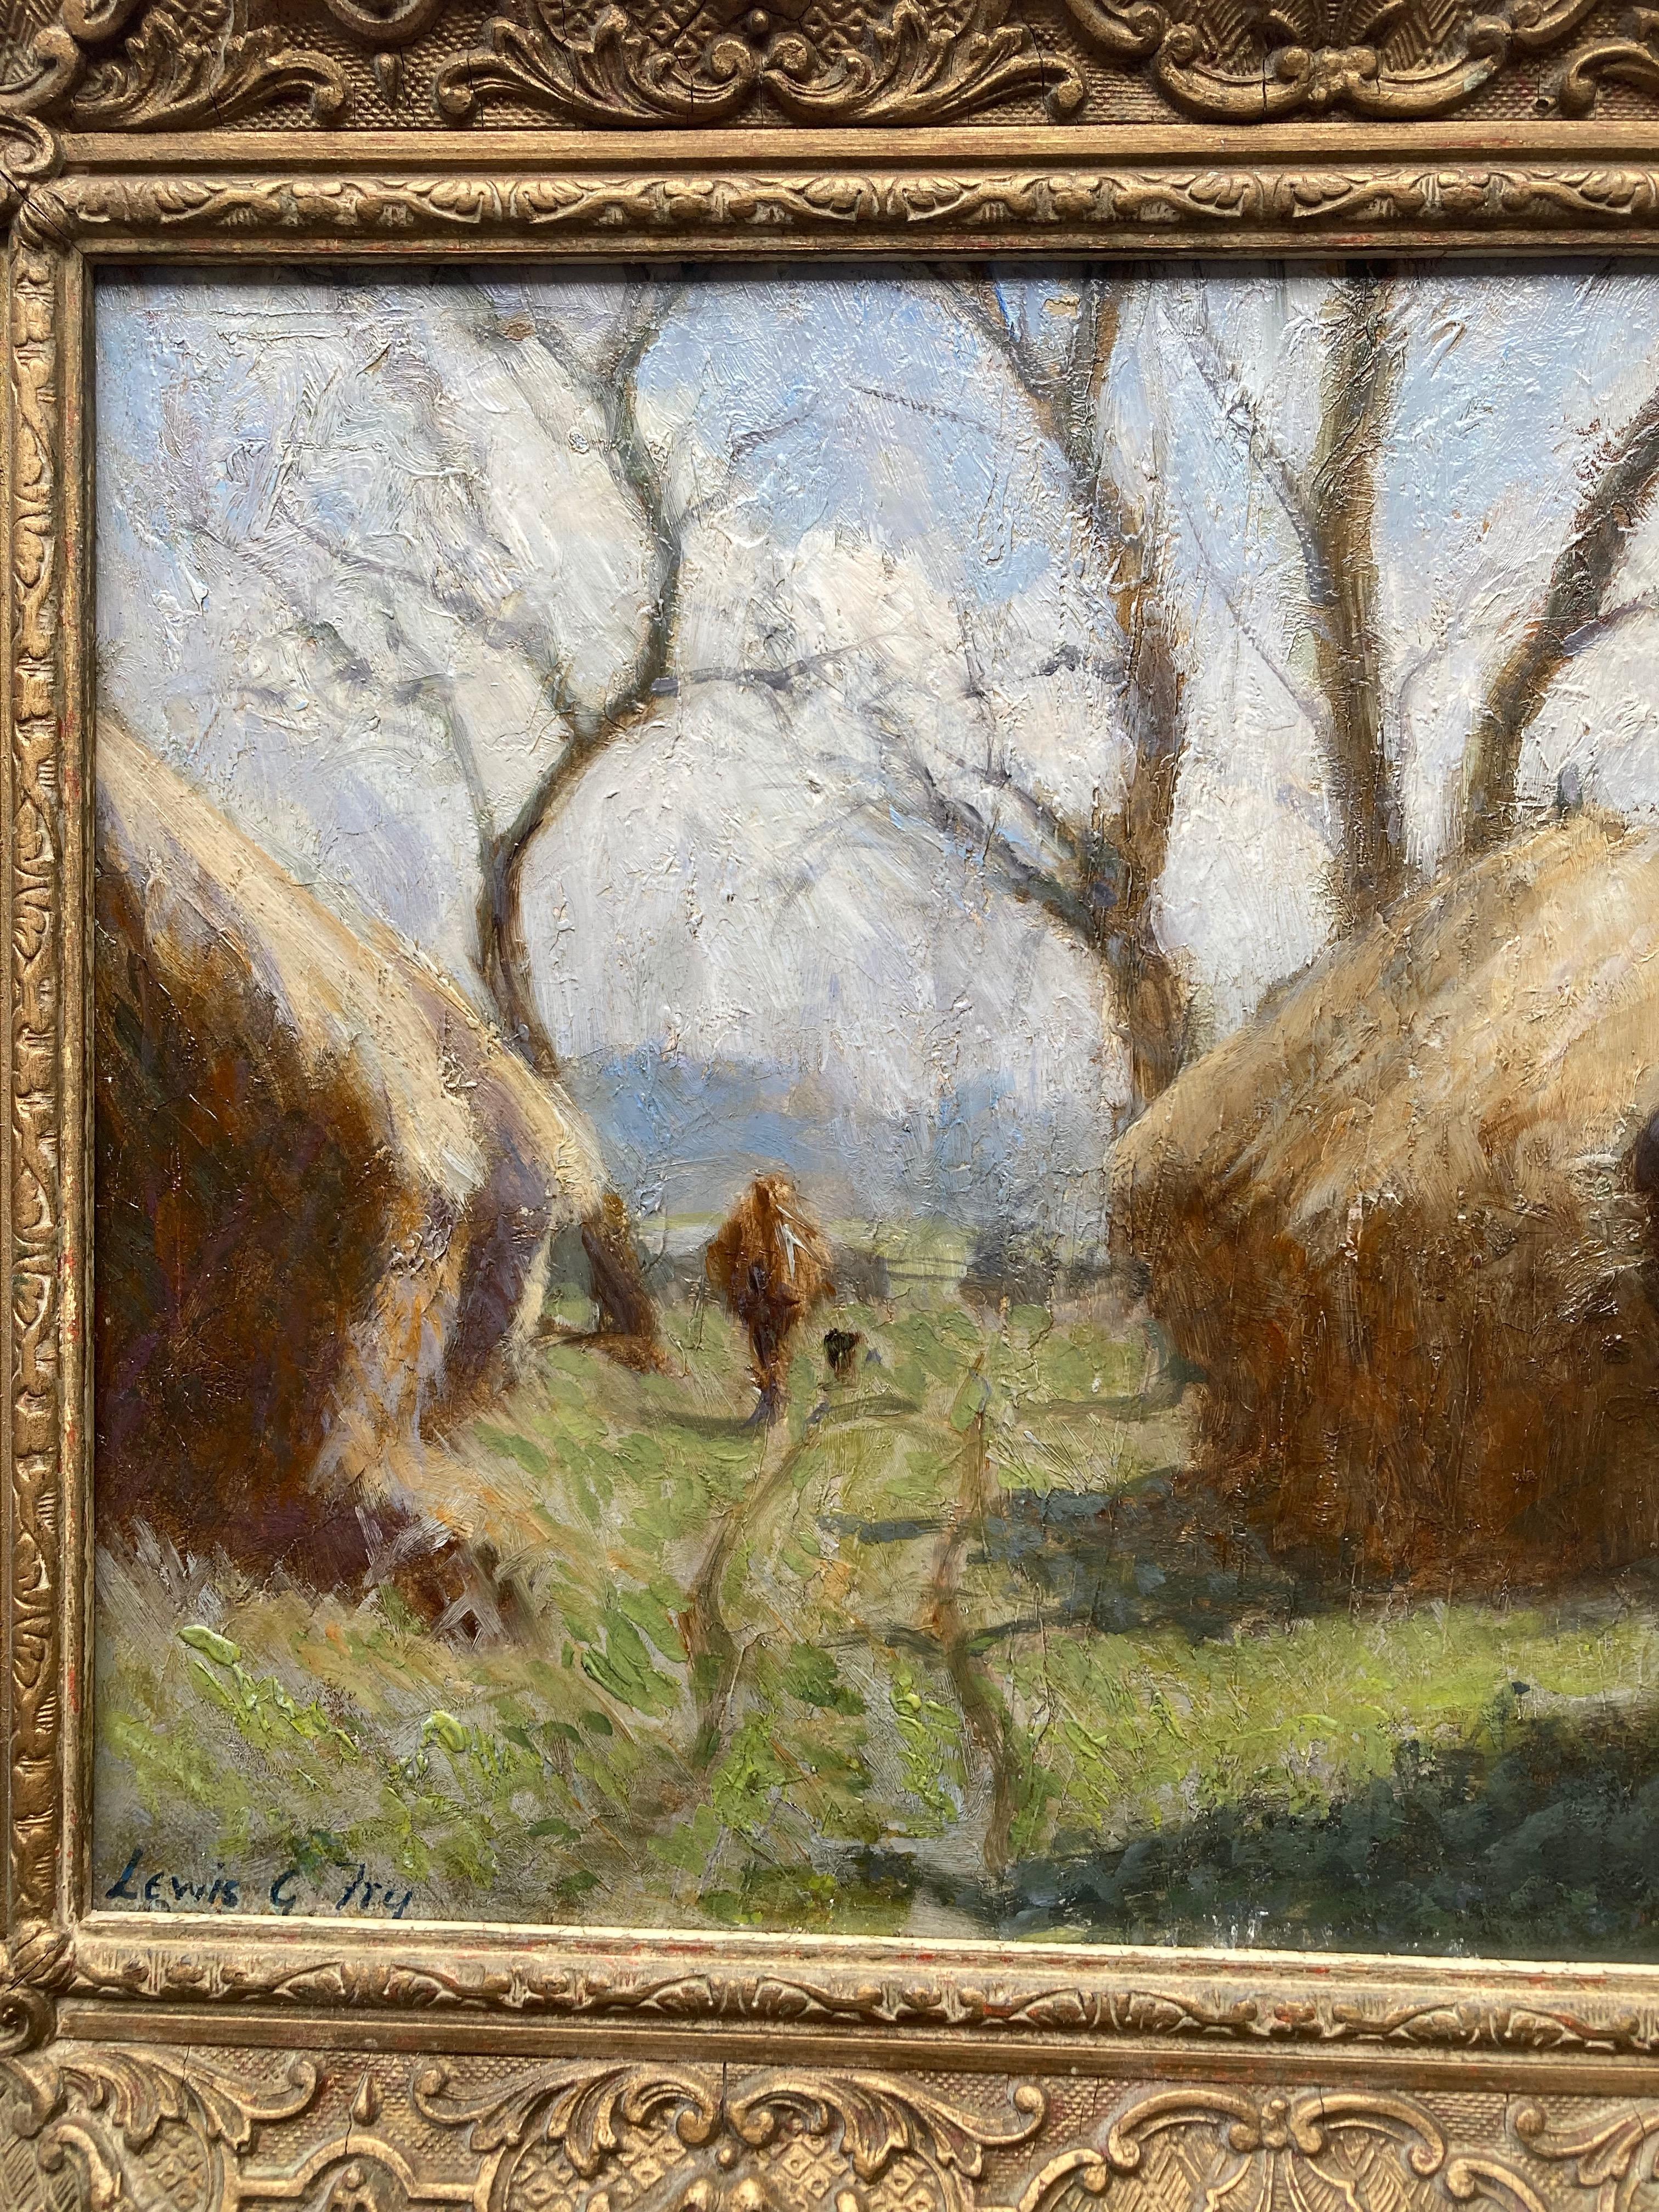 A wonderfully atmospheric view of a harvest scene painted in a most attractive impressionistic style.

Lewis George Fry (1860-1933)
A figure walking by haystacks, Limpsfield
Signed
Oil on panel
9¾ x 14 inches

Landscape painter. Born at Clifton,